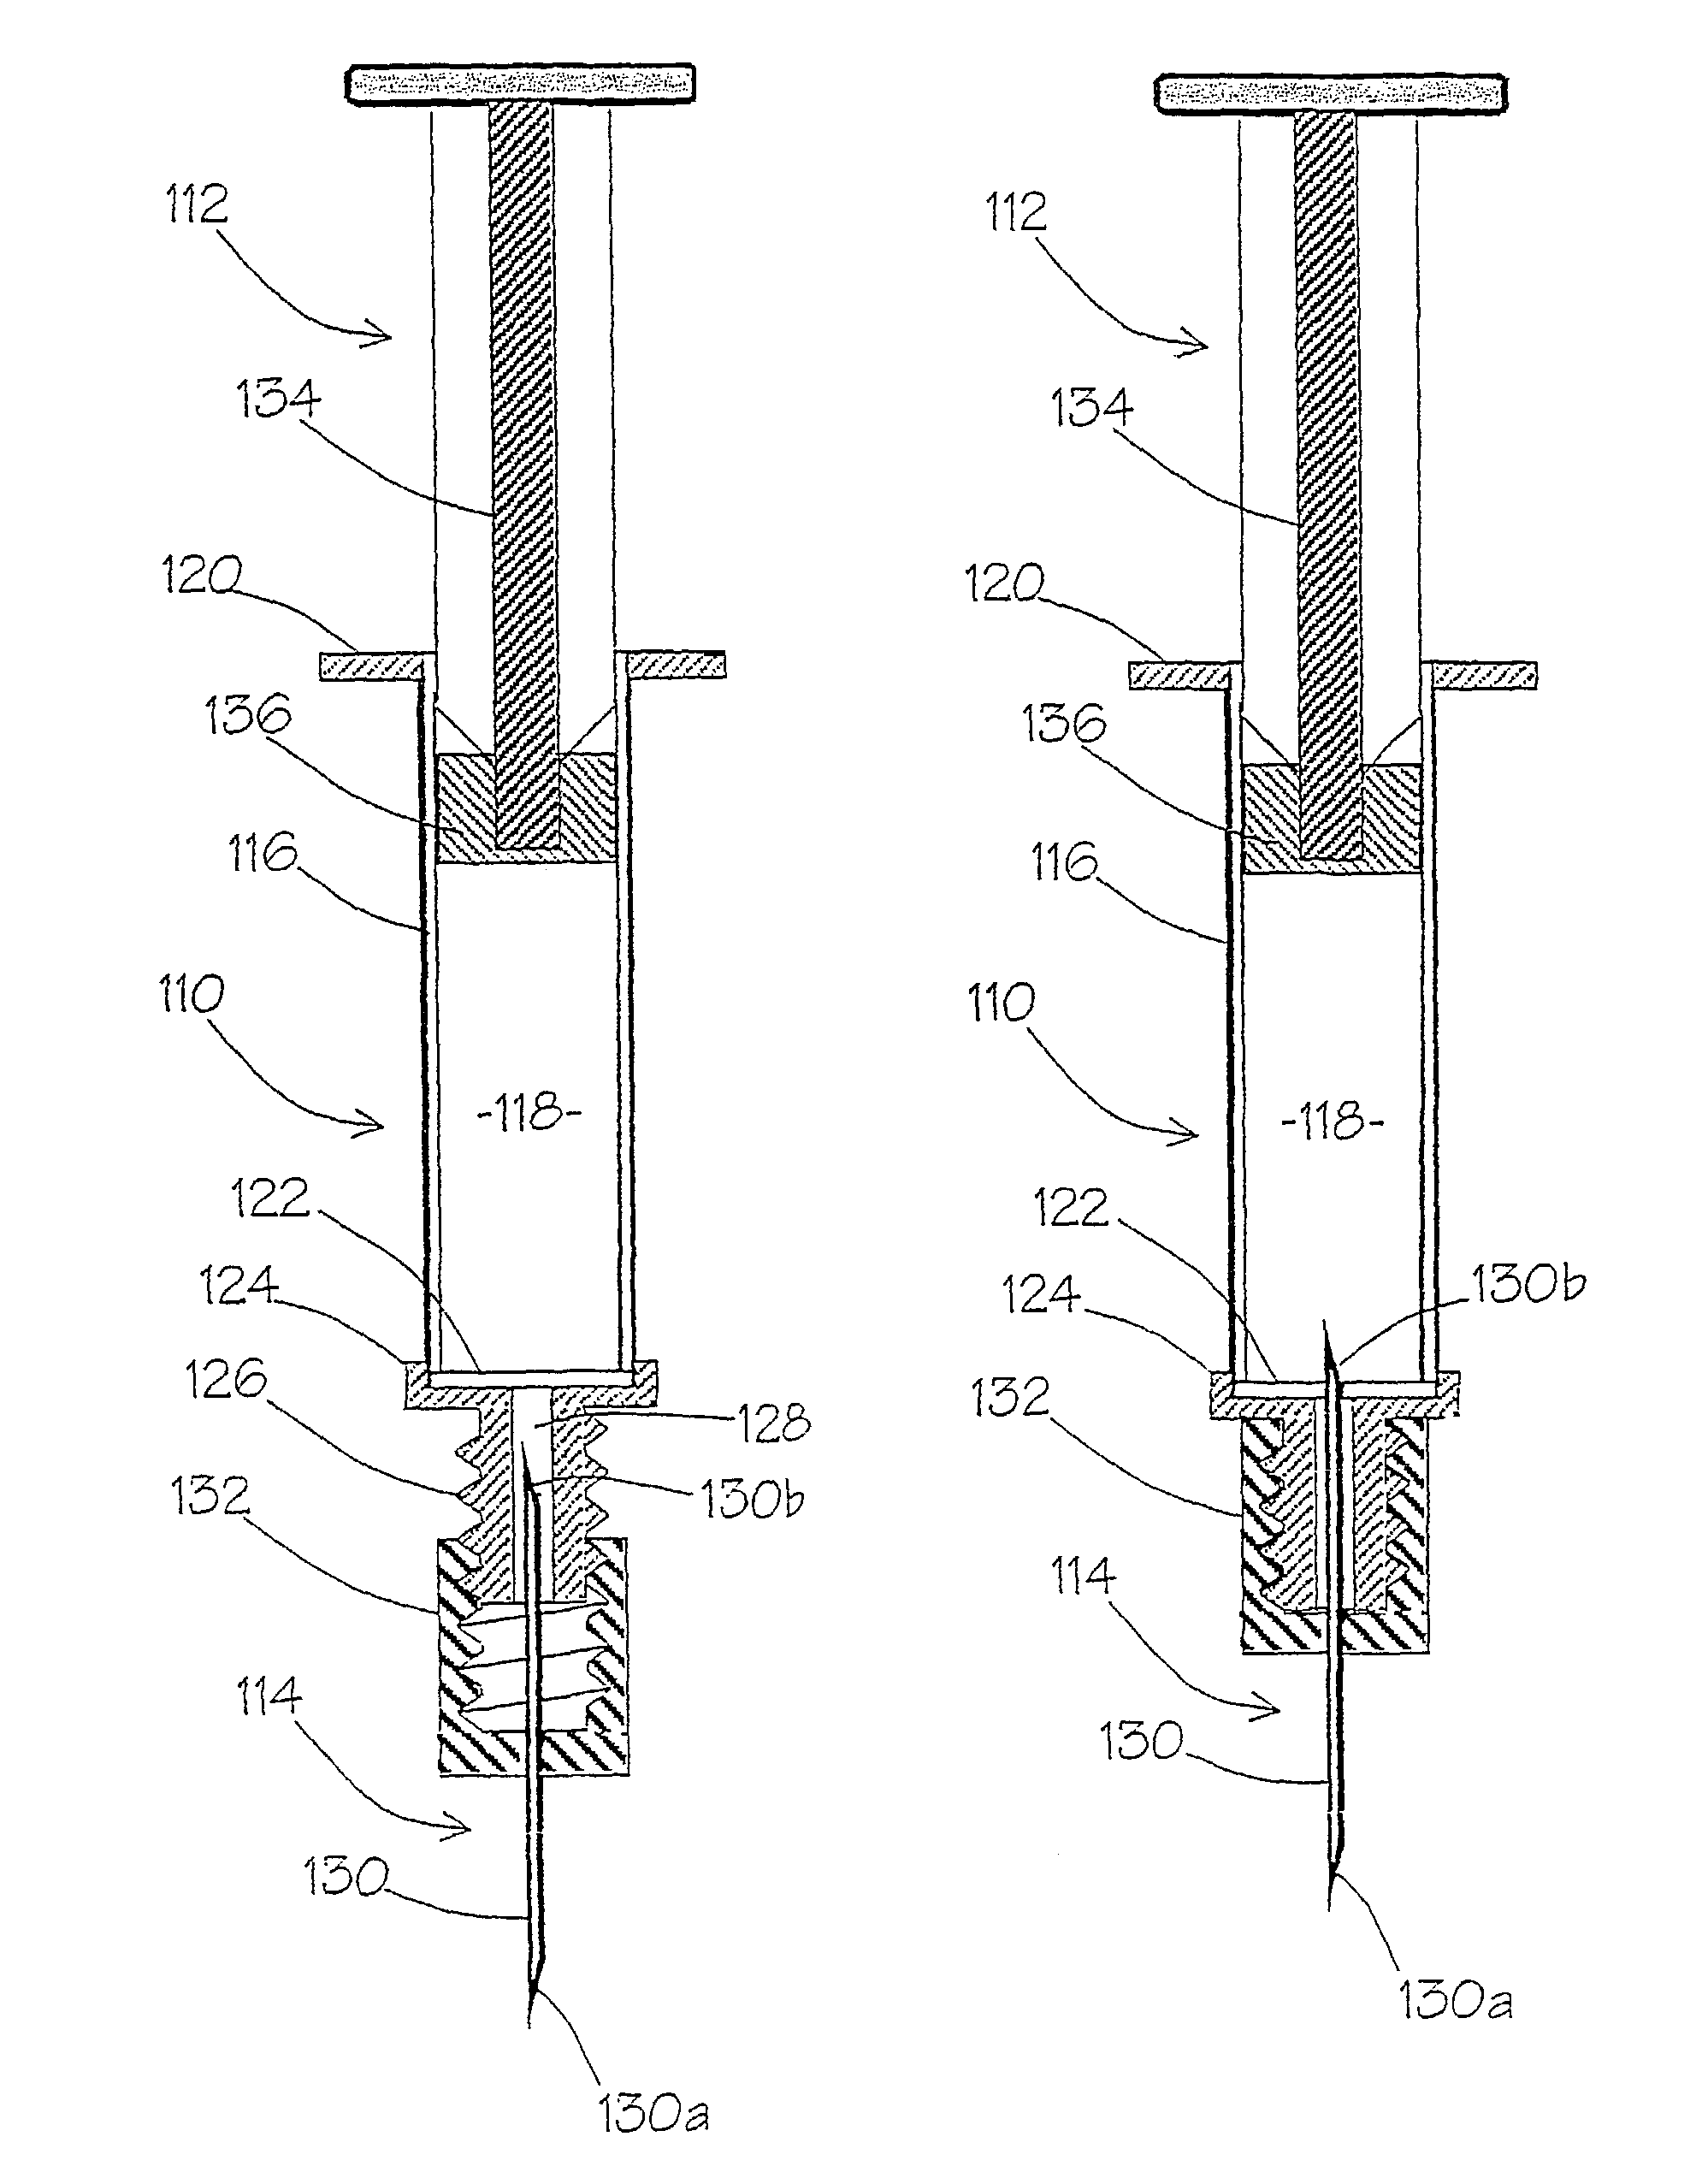 Hypodermic syringe with passive aspiration feature